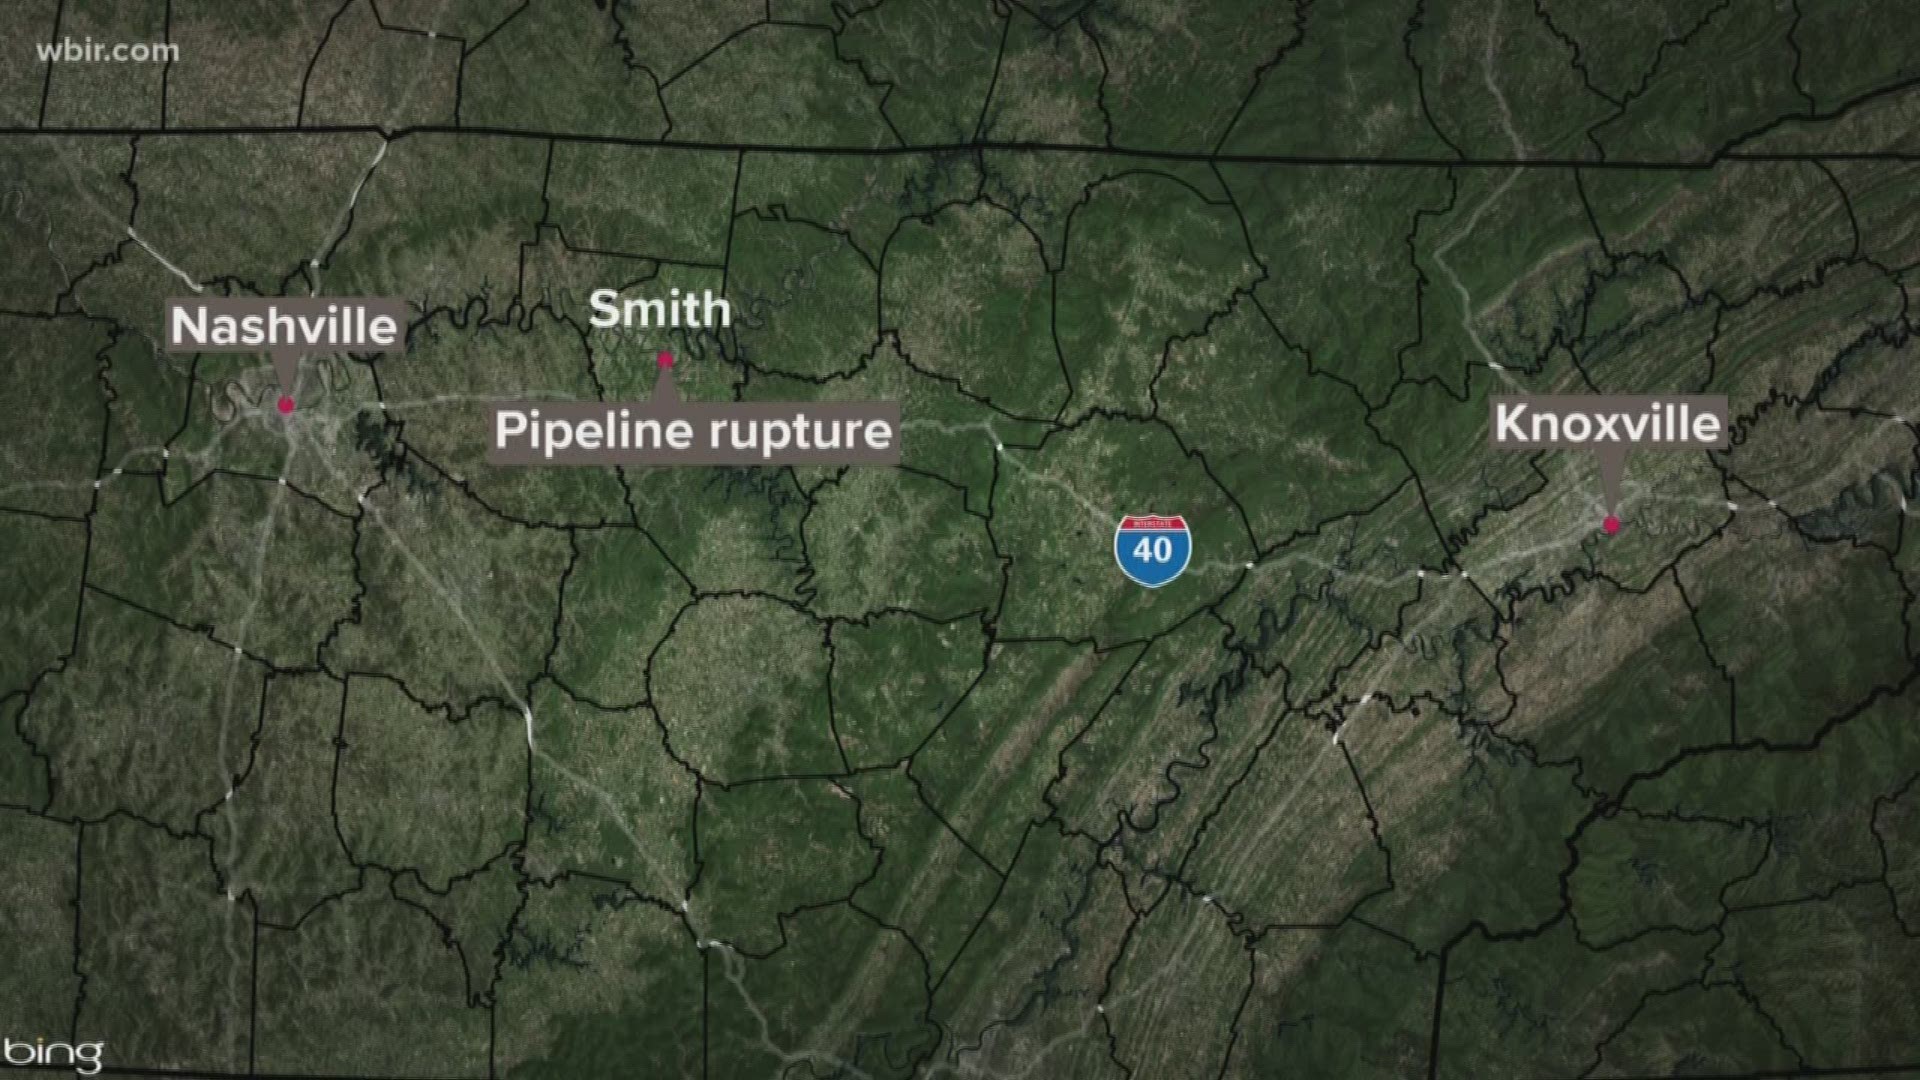 KUB said a ruptured pipeline in Middle Tennessee is now working again. The line belongs to Enbridge, and stretches into East Tennessee.